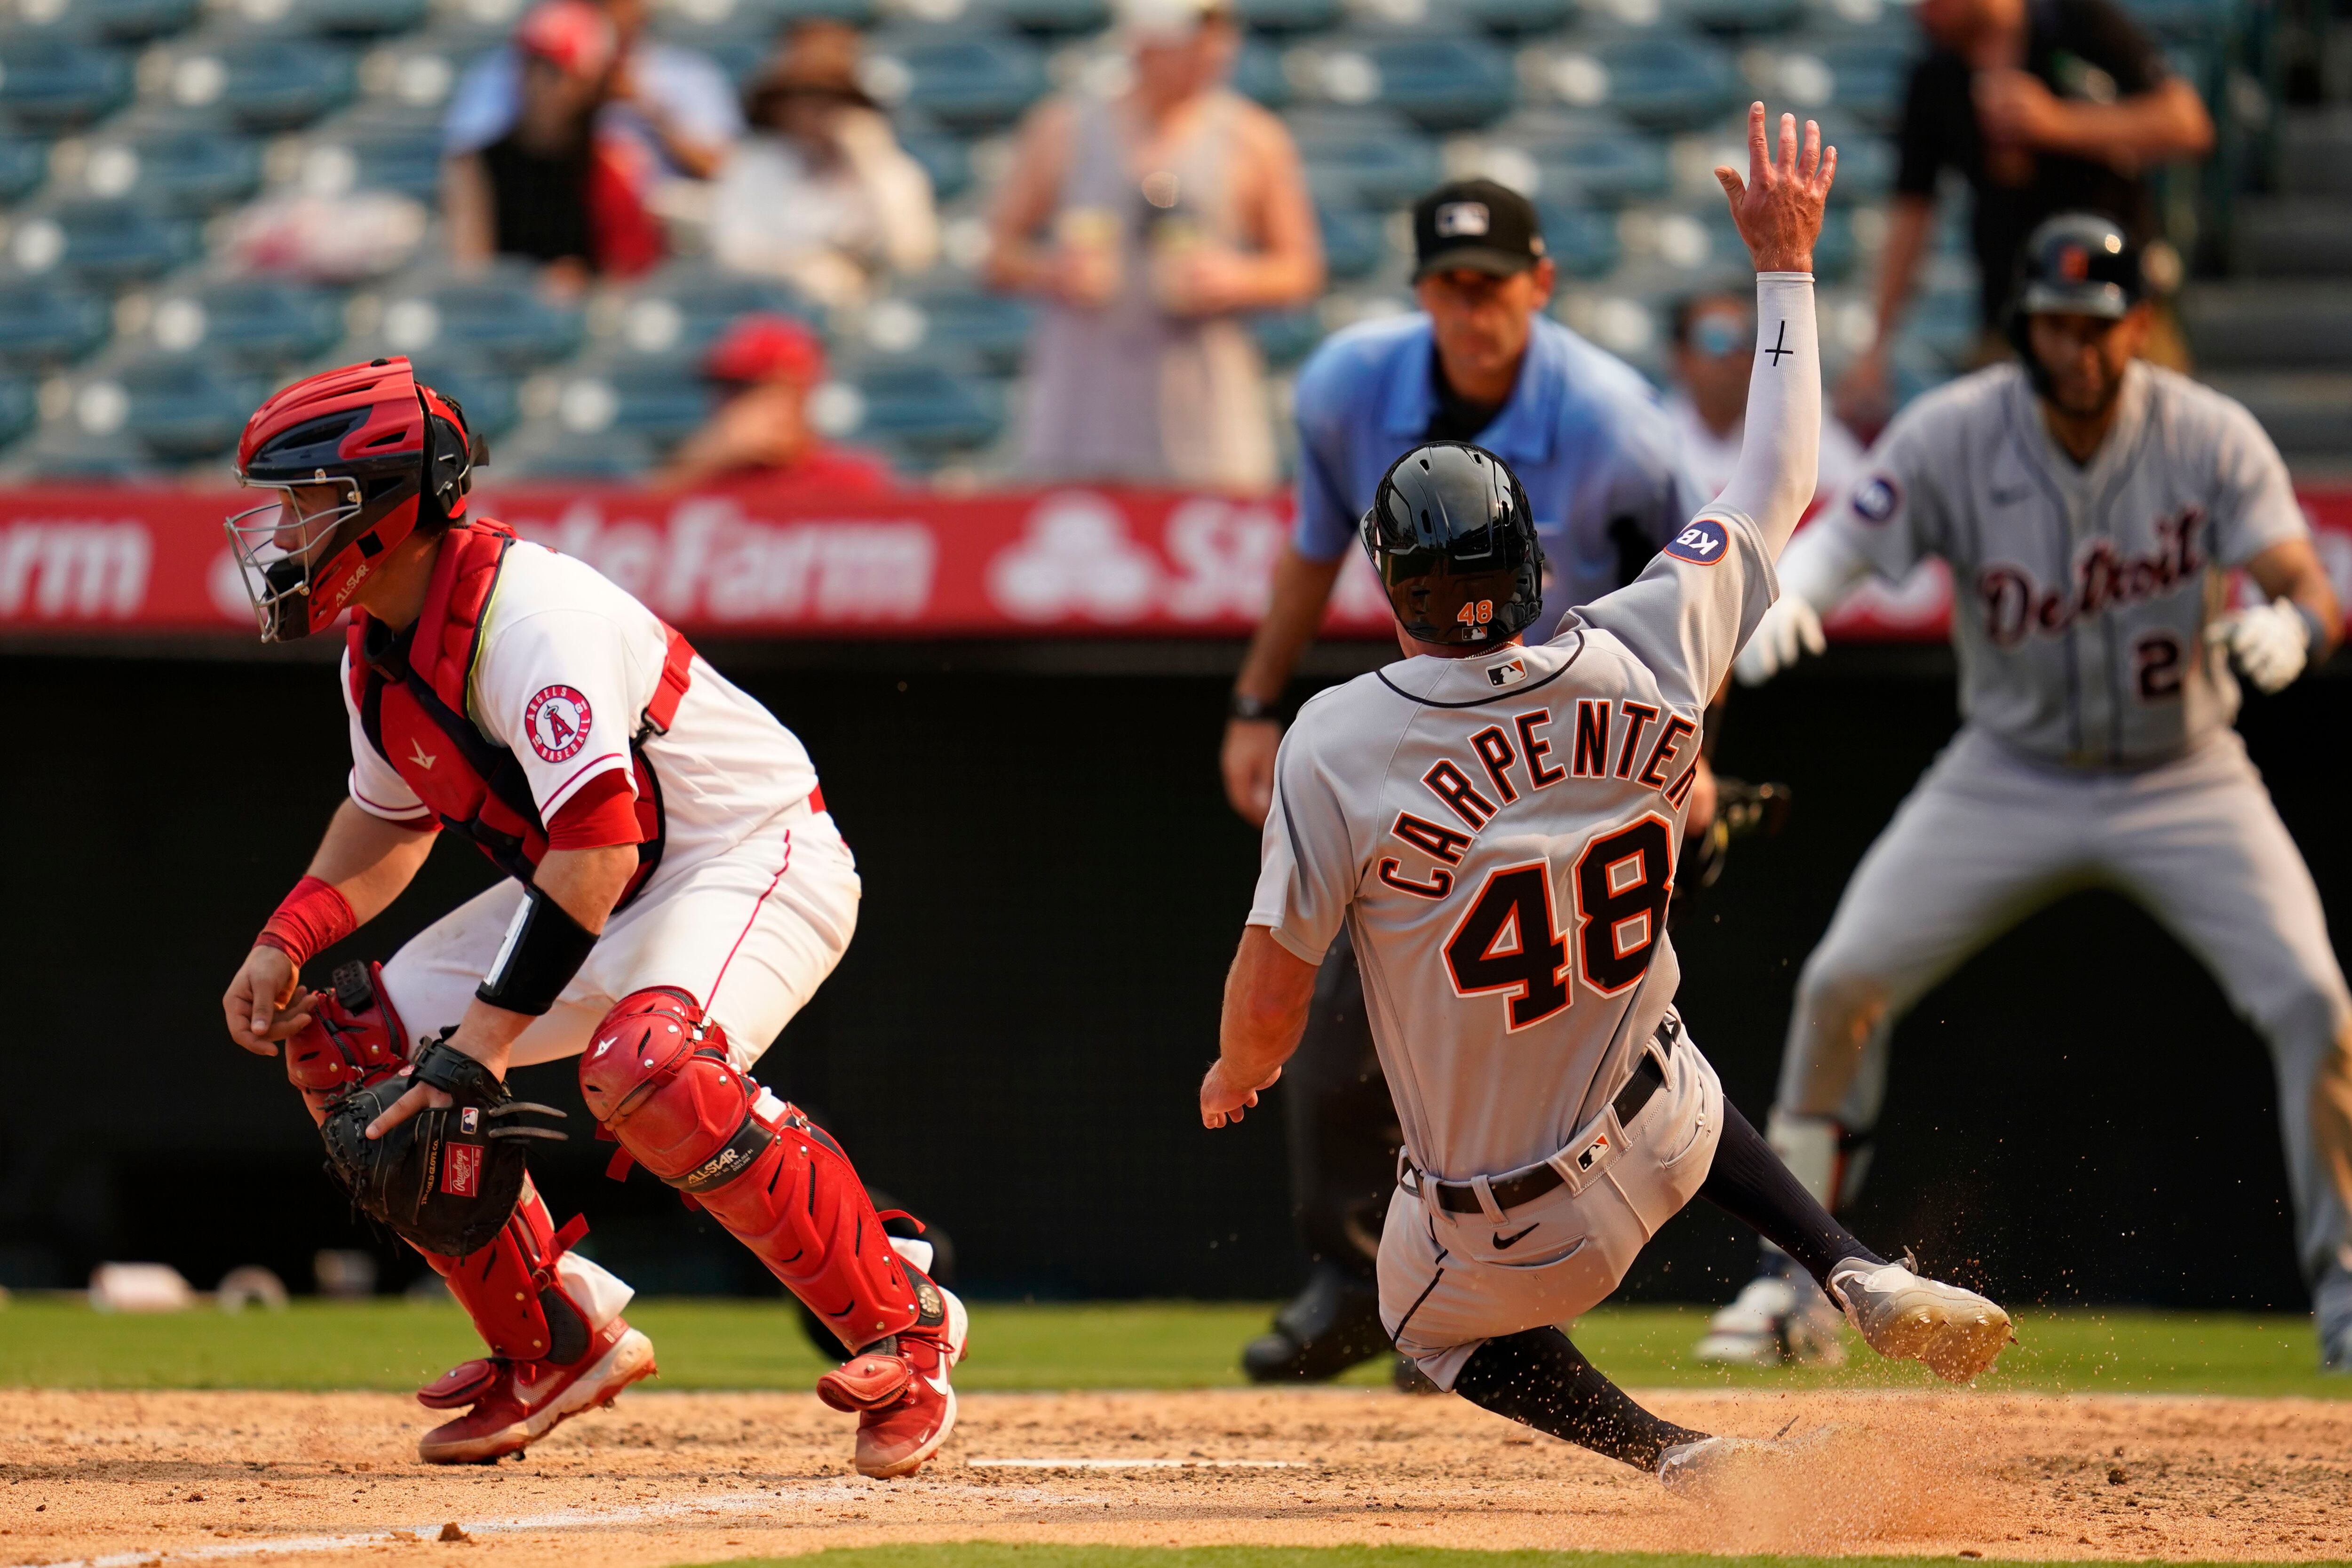 Carpenter homers twice to help Lorenzen and the Tigers beat the